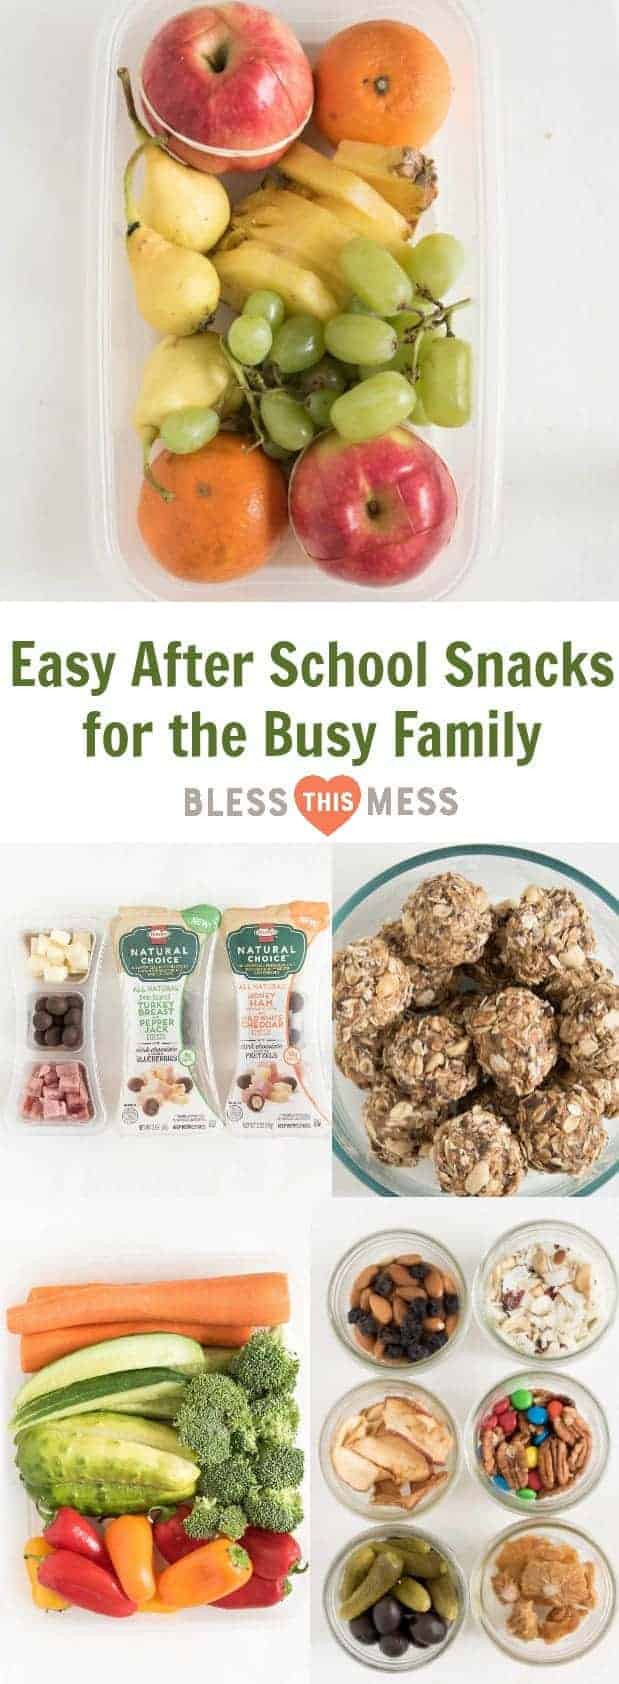 Easy After School Snacks for the Busy Family